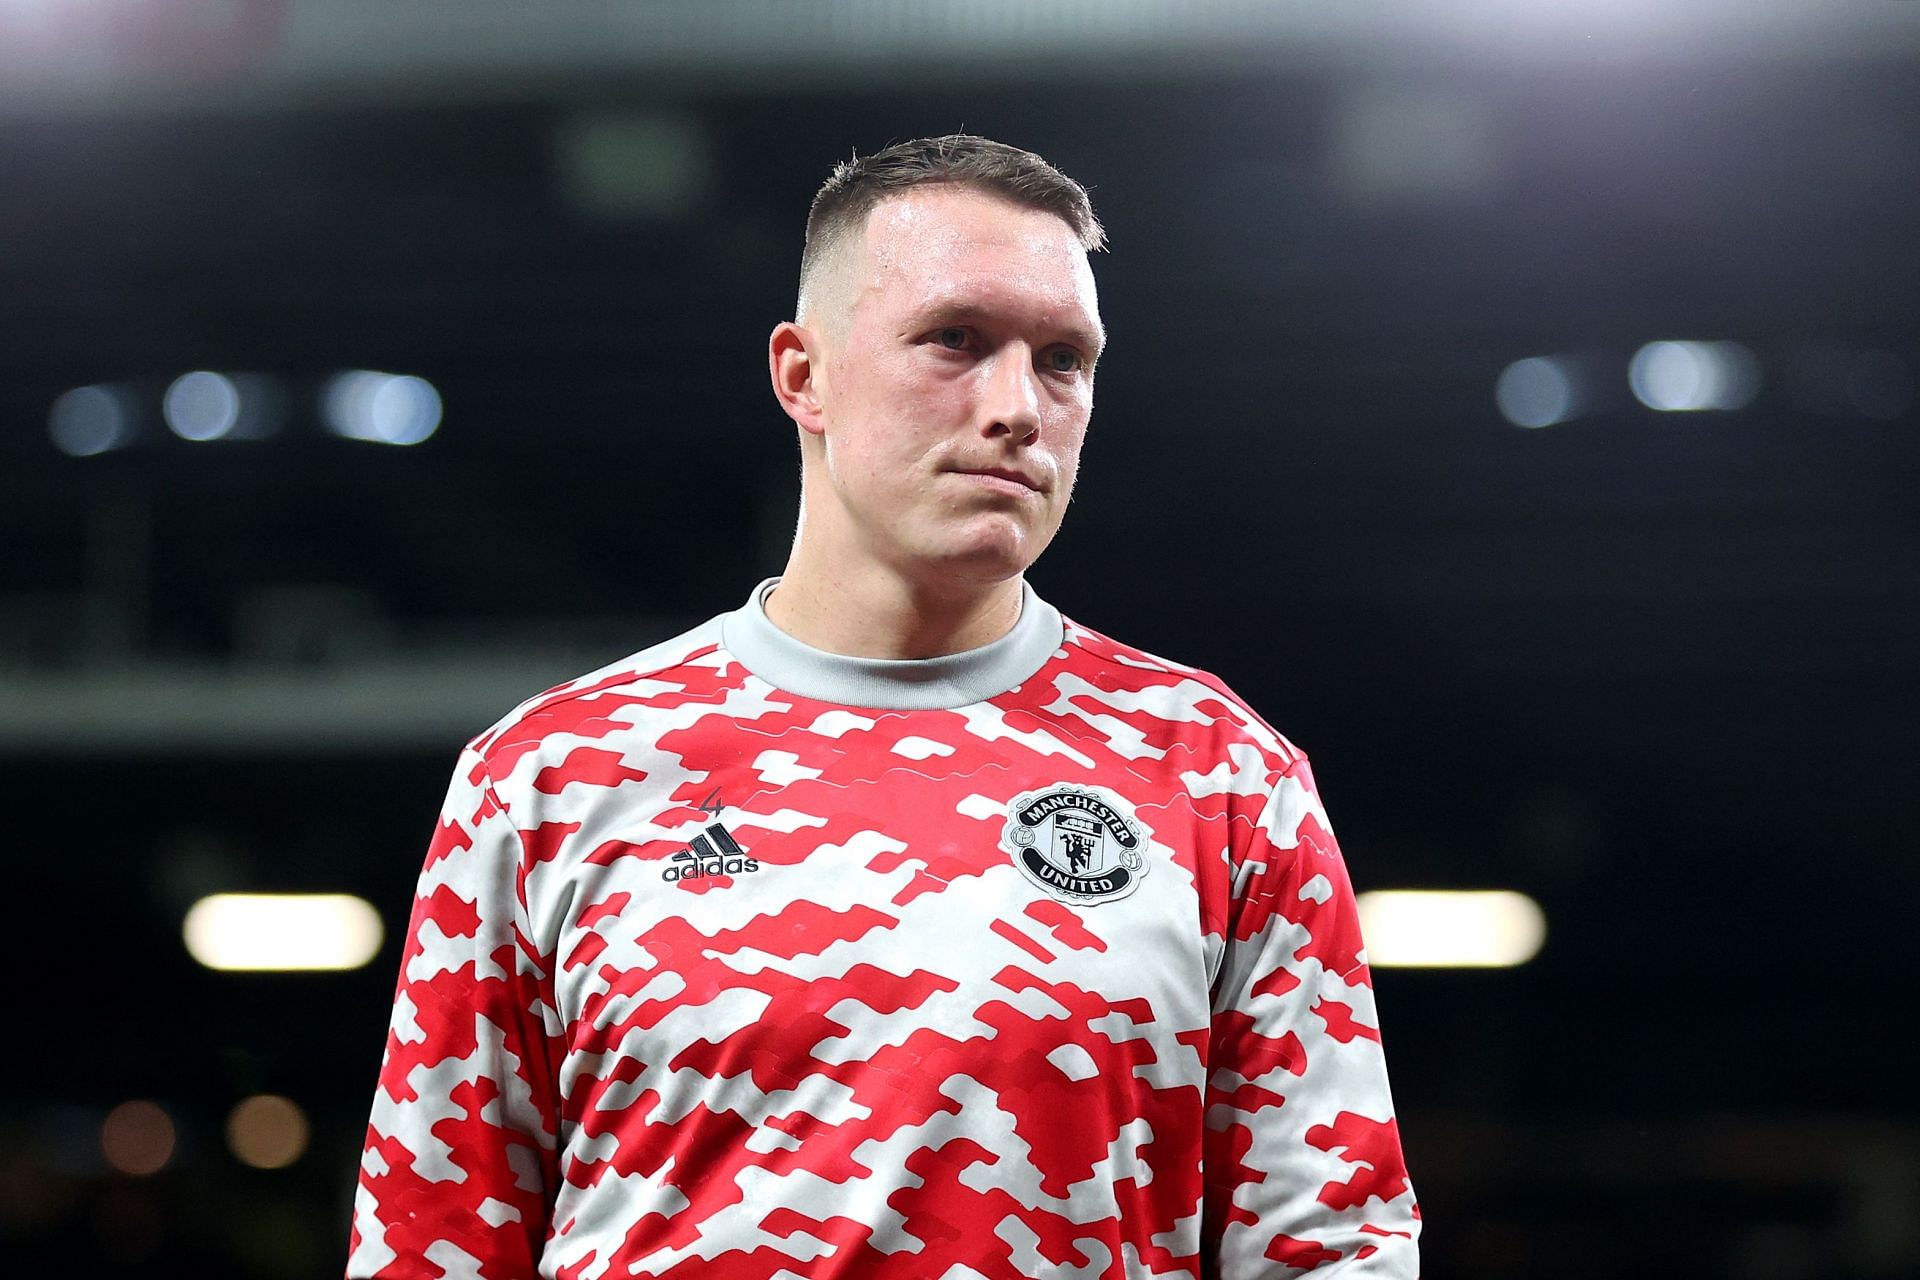 Jones made his first Manchester United appearance in almost two years